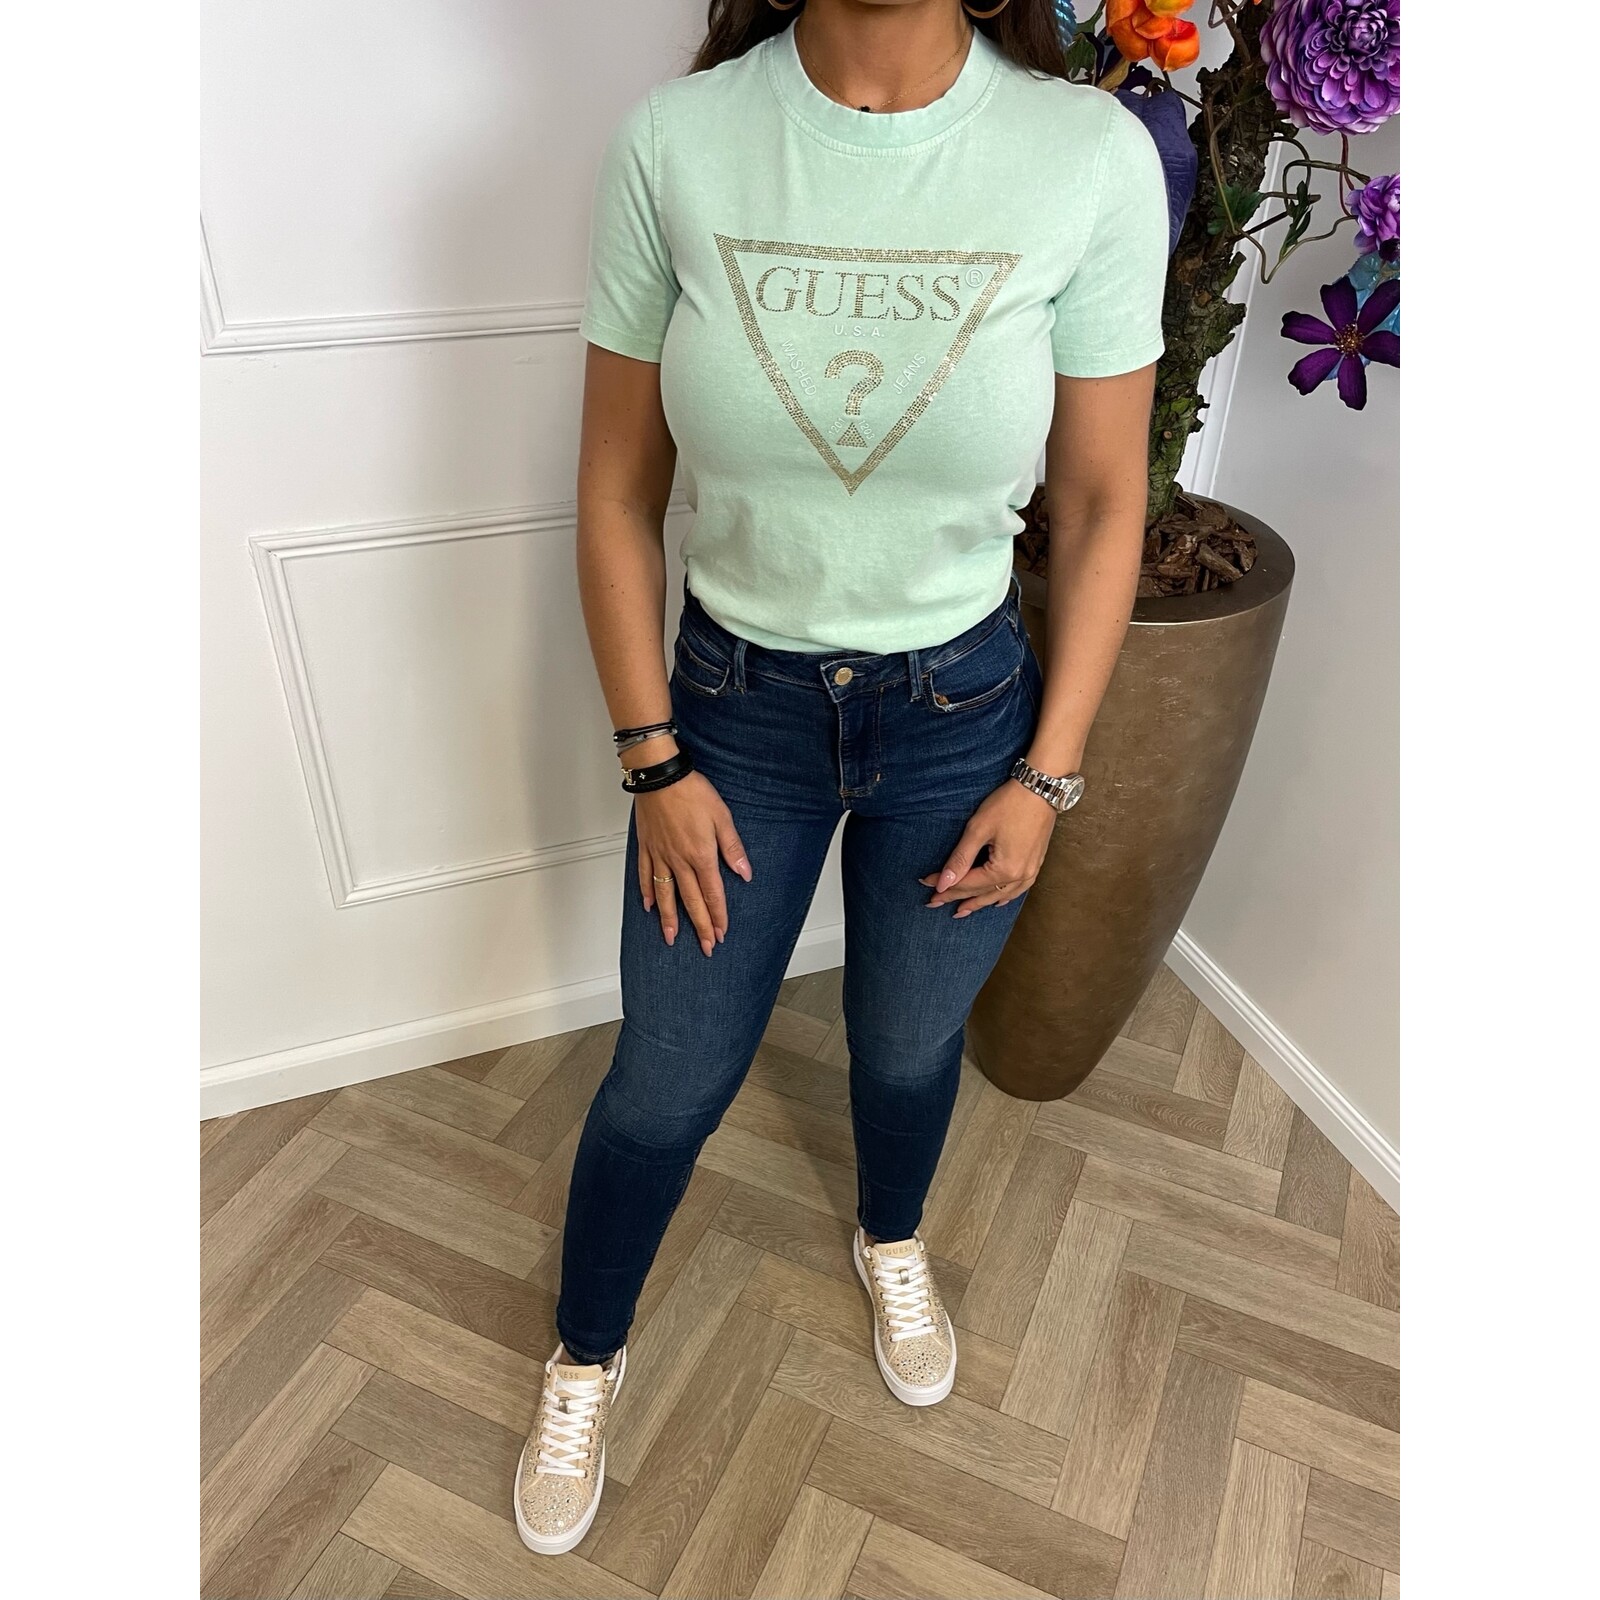 Guess T-shirt Gold Triangle Mint Guess 769